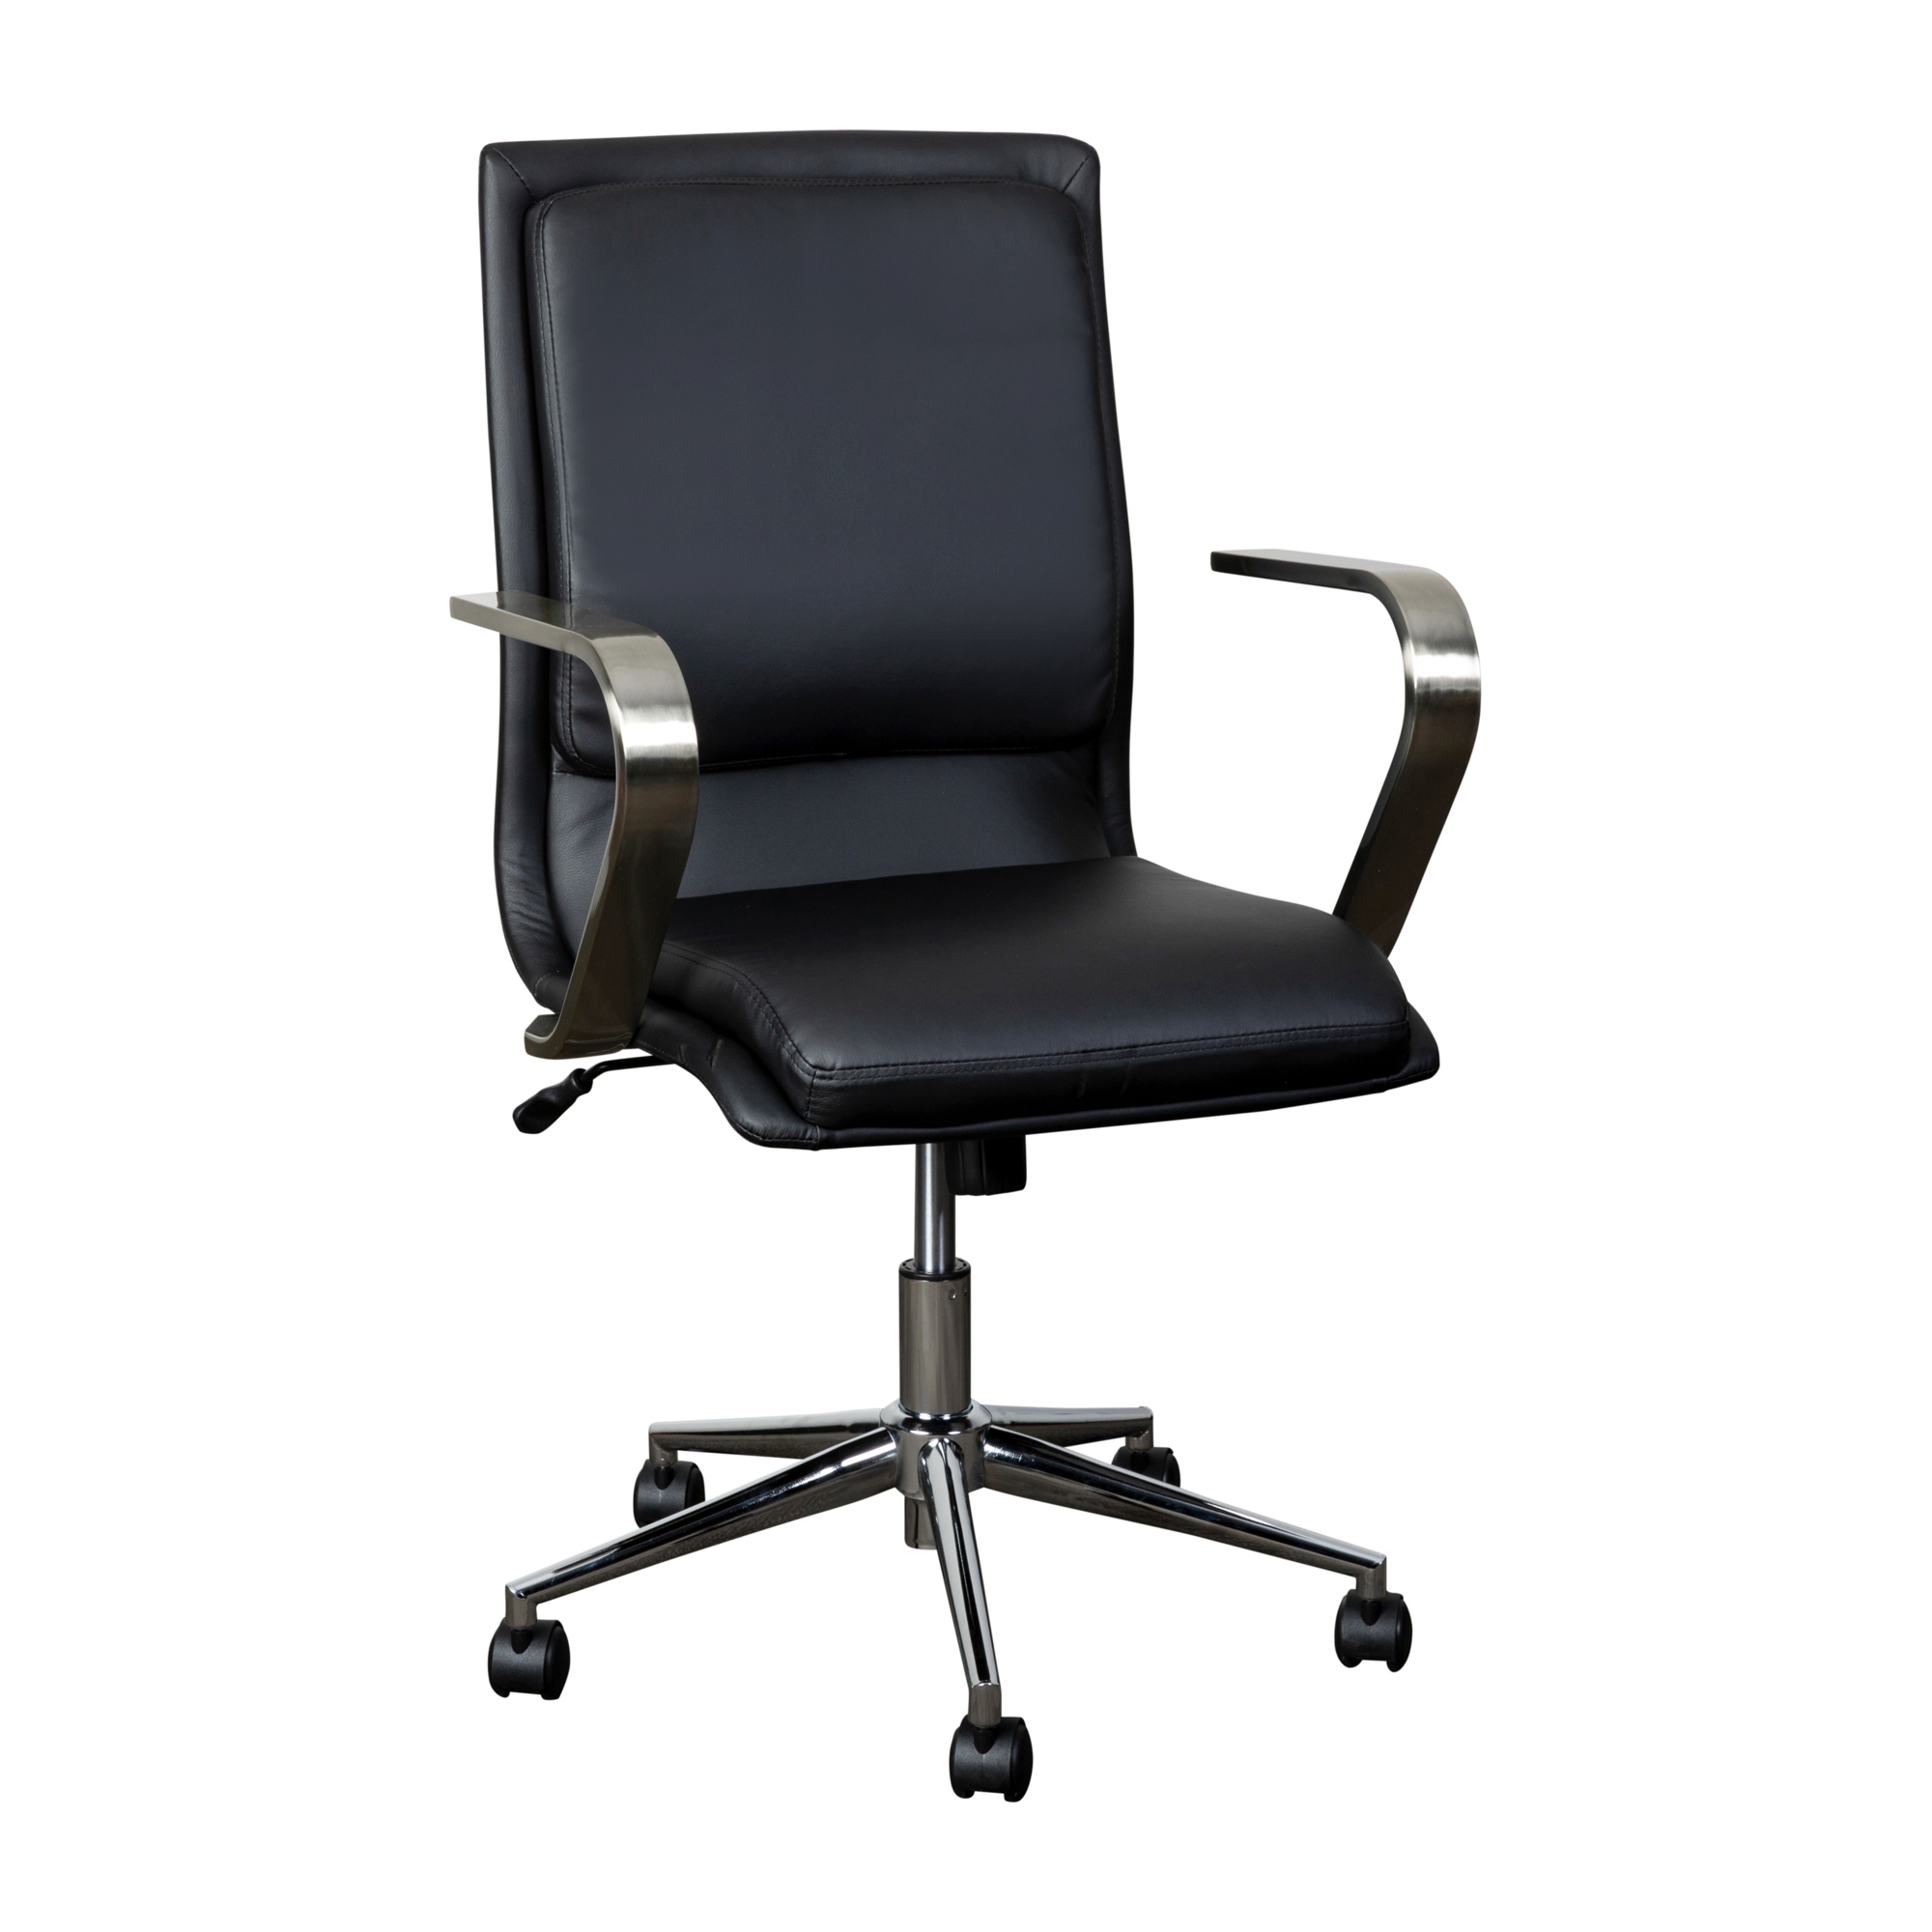 Flash Furniture, Black LeatherSoft Office Chair with Chrome Arms, Primary Color Black, Included (qty.) 1, Model GO21111BBKCHR